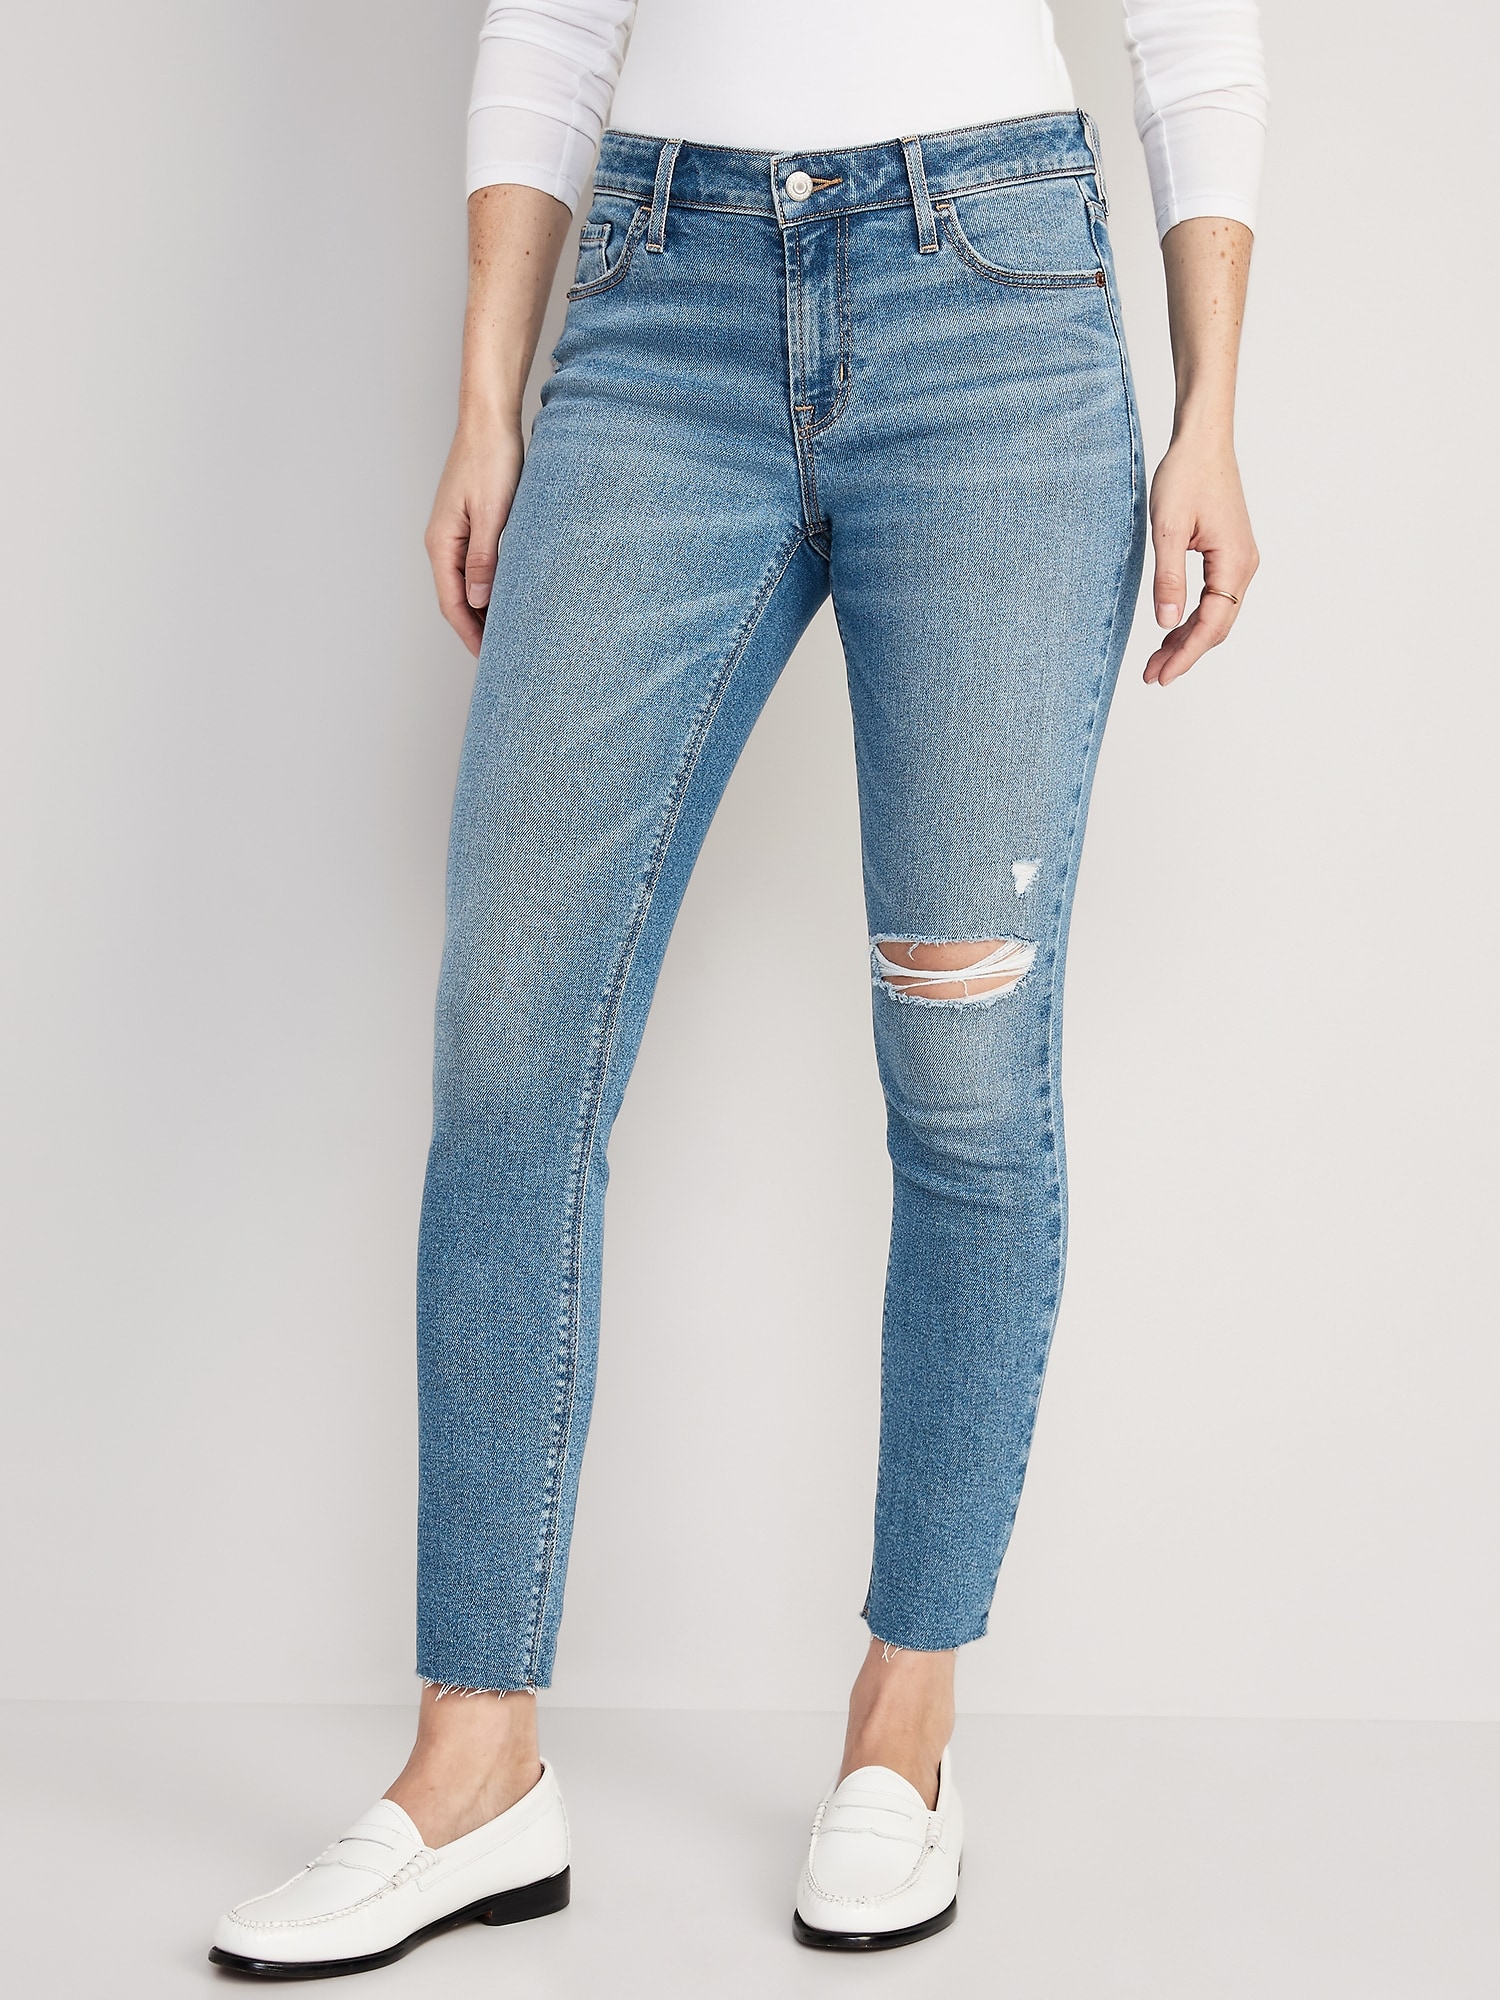 ONLSophie life mw Cropped jeans with 20% discount!